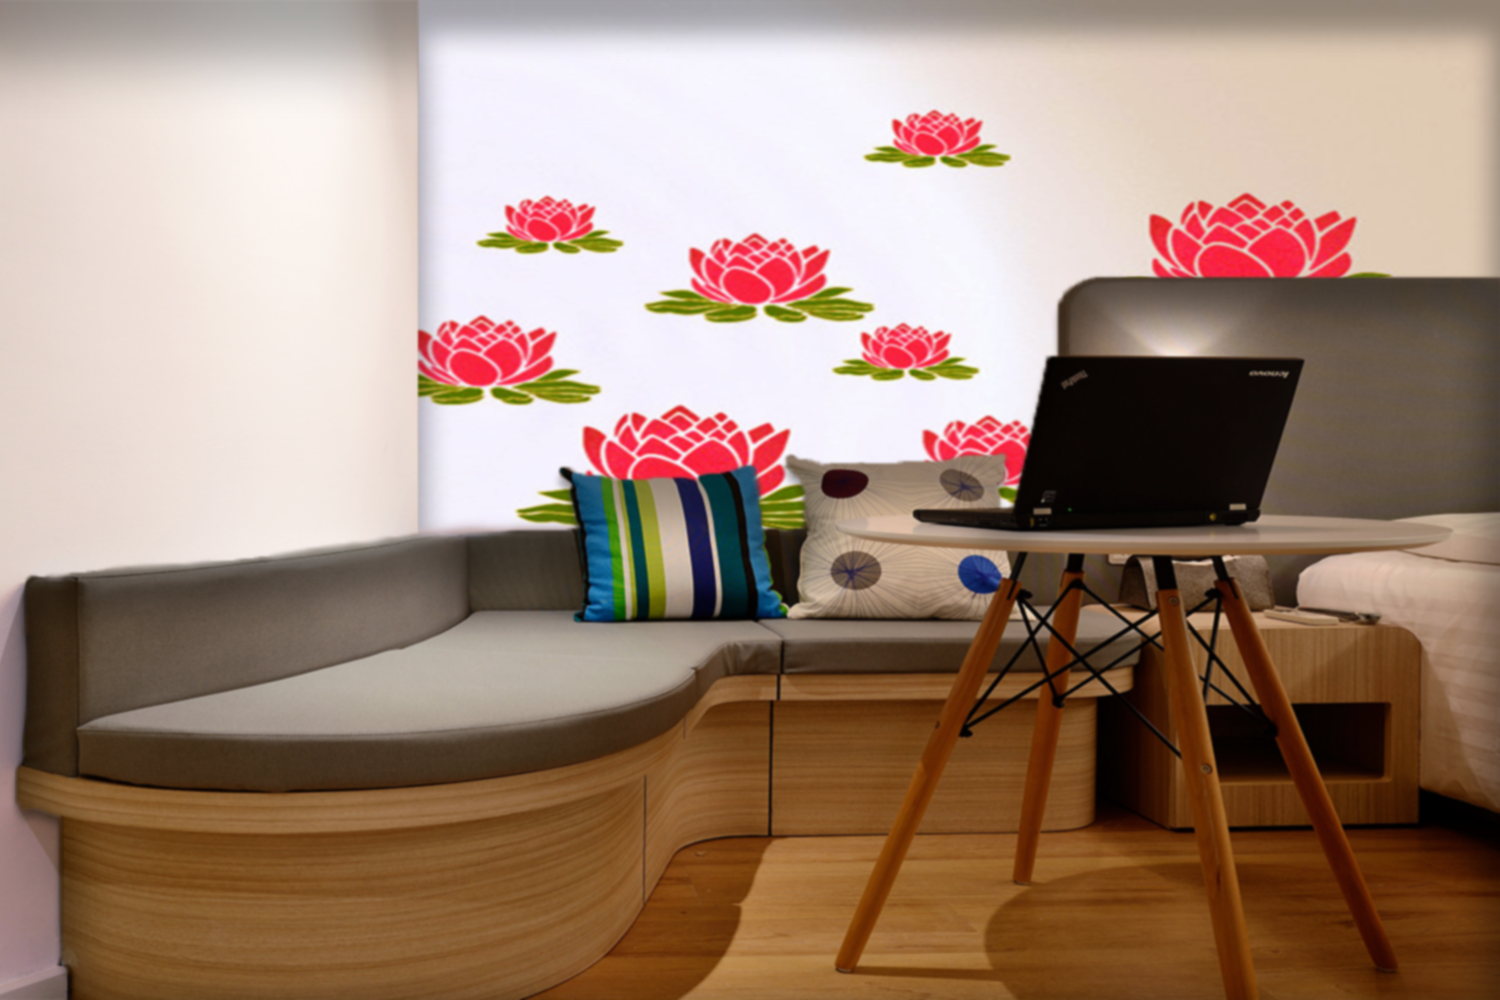 ColourDrive-Royale Luxury Emulsion Lotus House Wall Stencil Design Painting  for Bedroom,Kitchen Room,Study Room,Kids Room